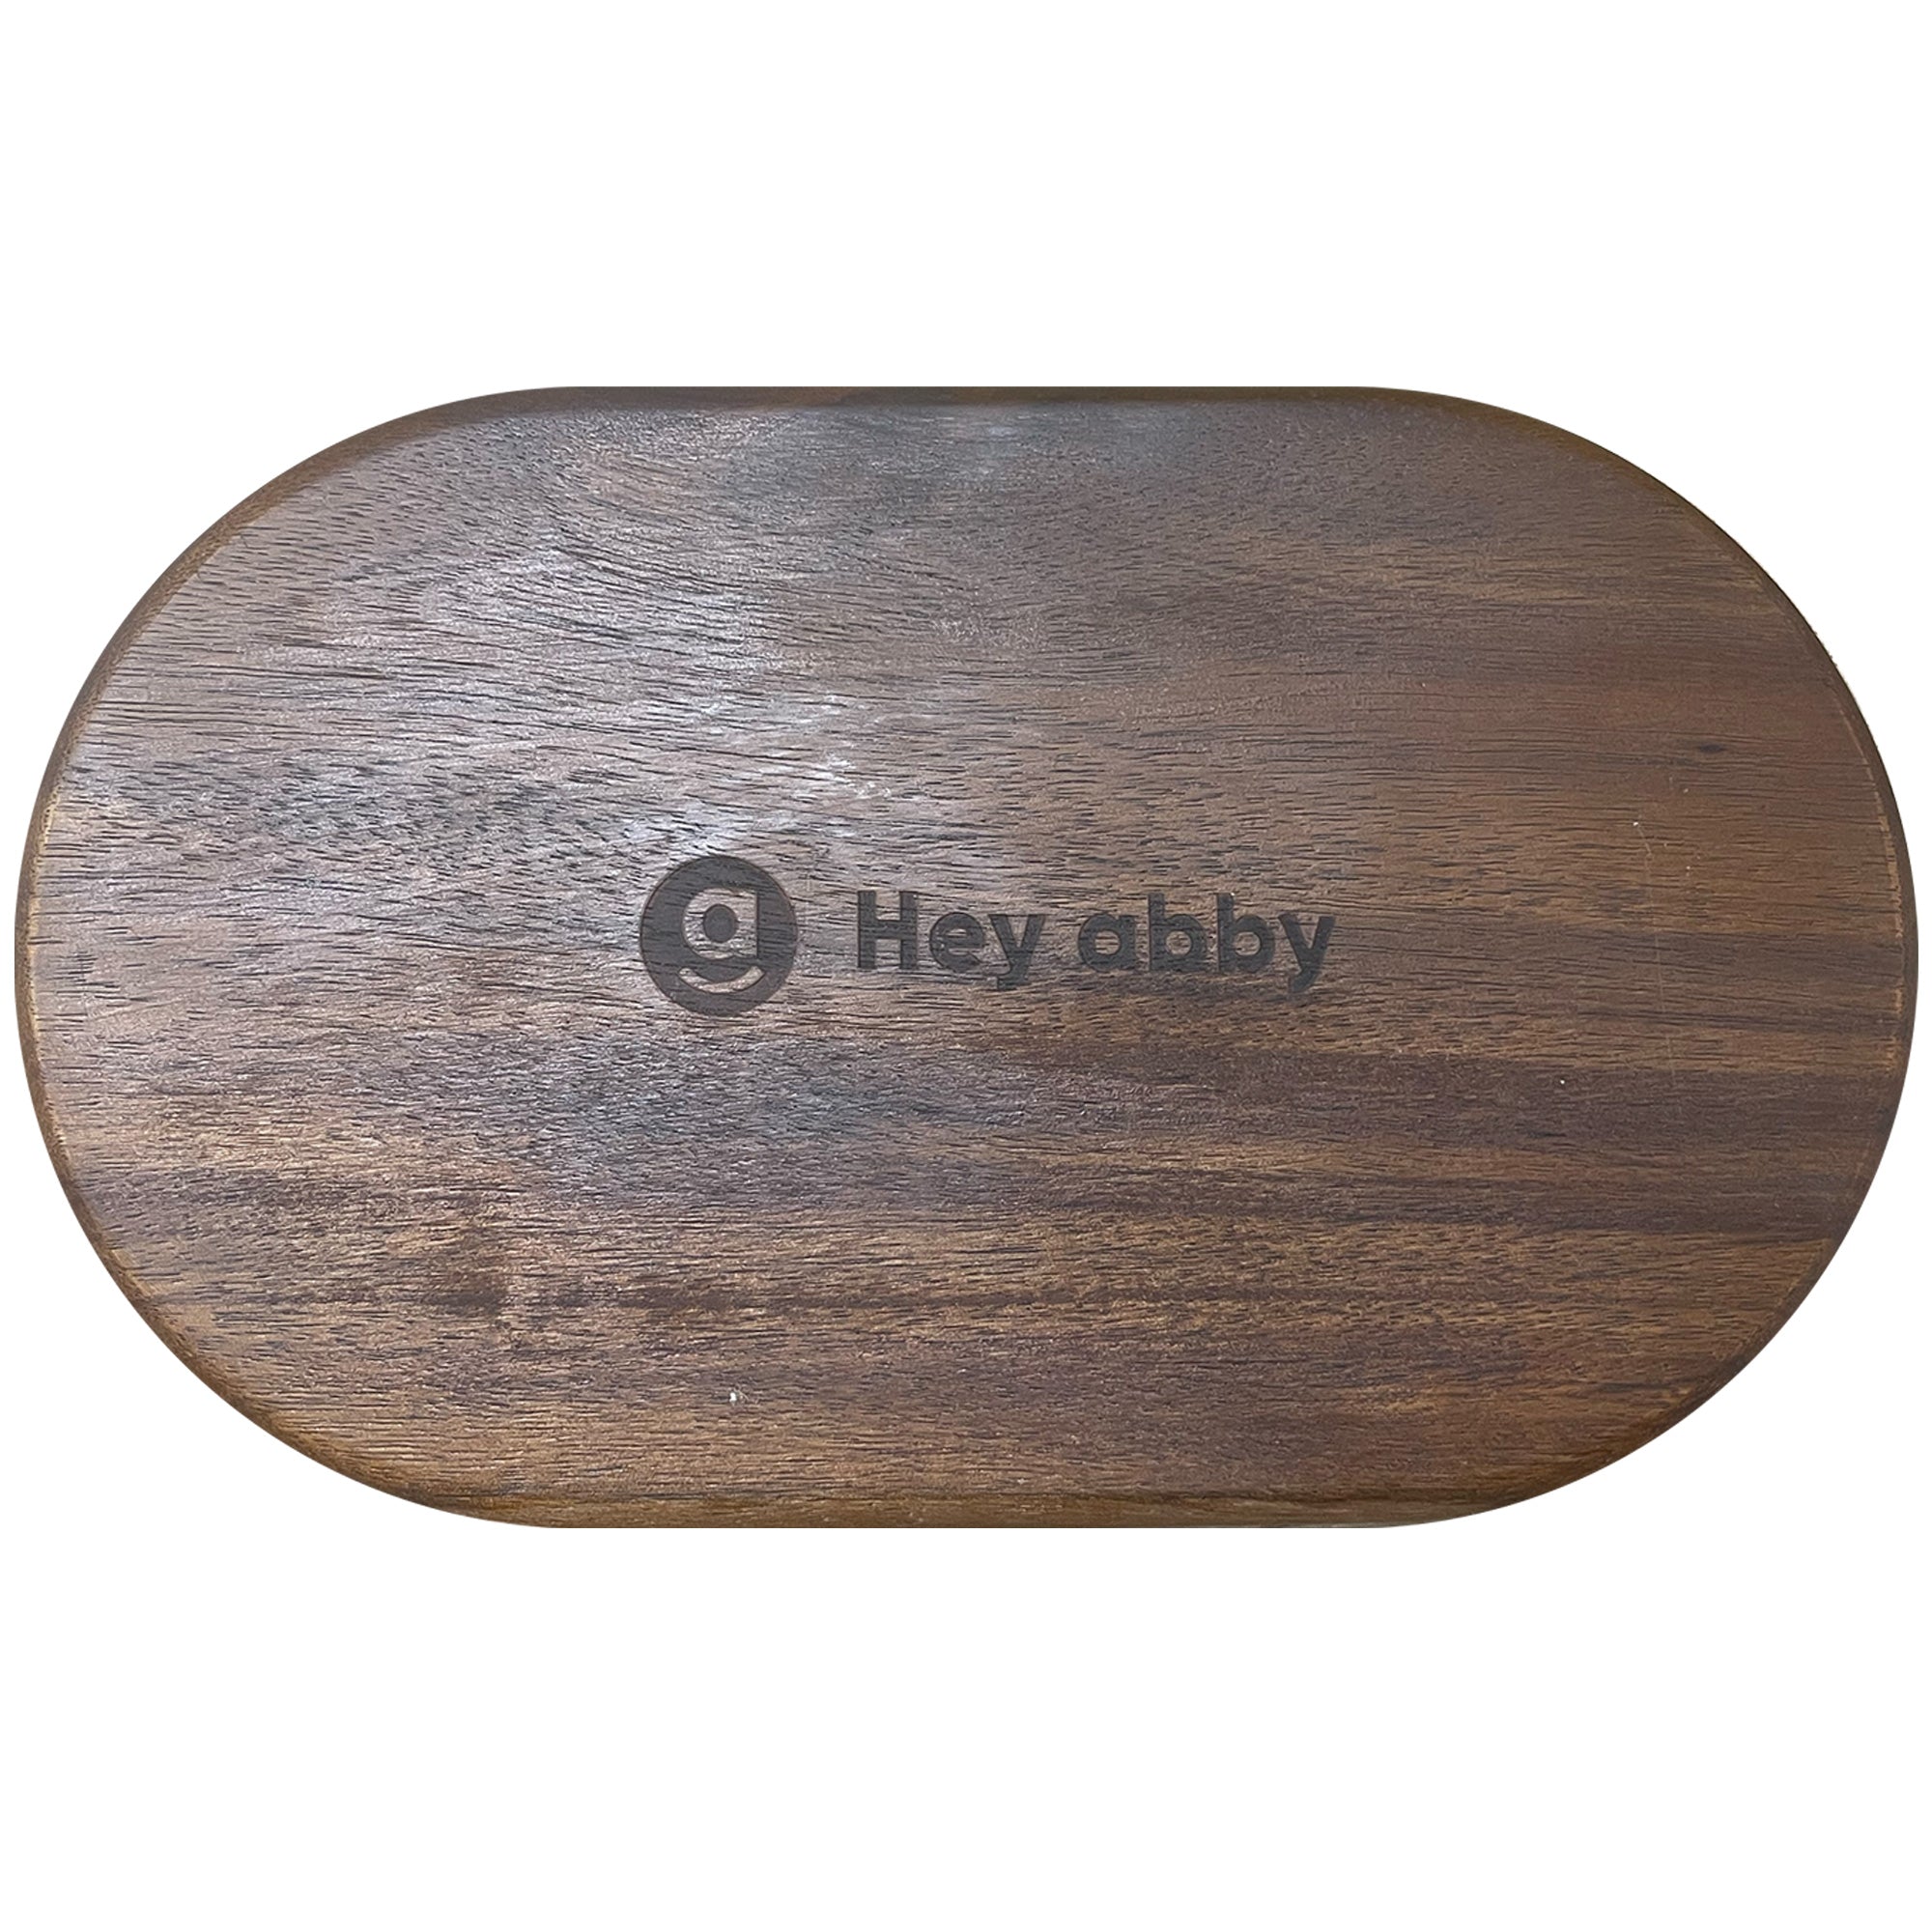 Hey abby Acacia Wood Tray_Unique and Personalized